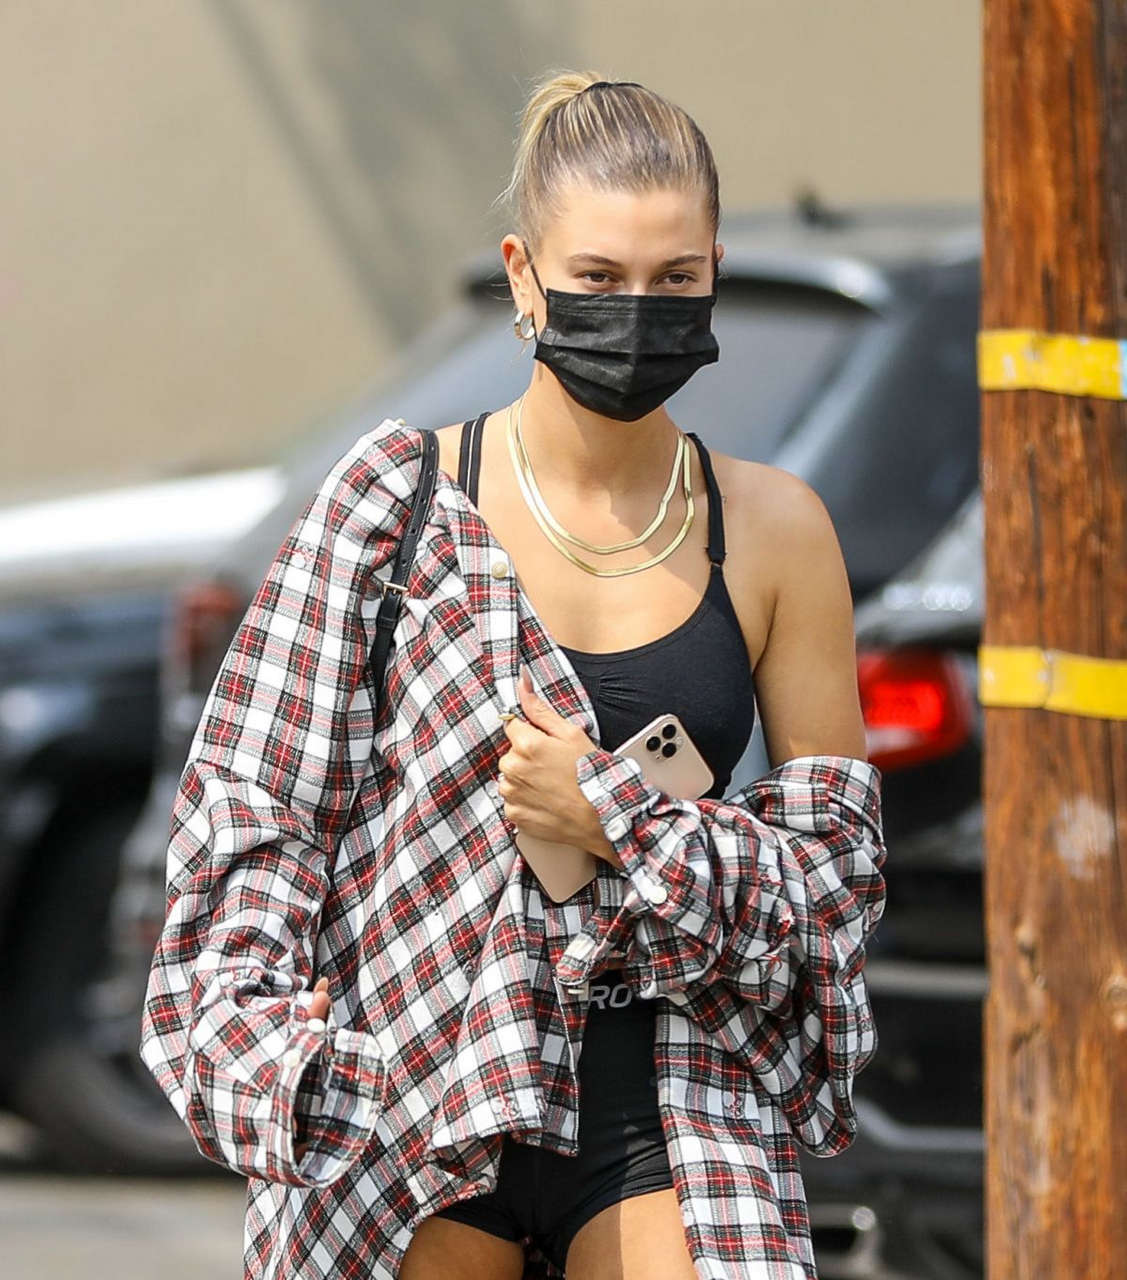 Hailey Bieber Kendall Jenner Justine Skye Out For Lunch West Hollywood